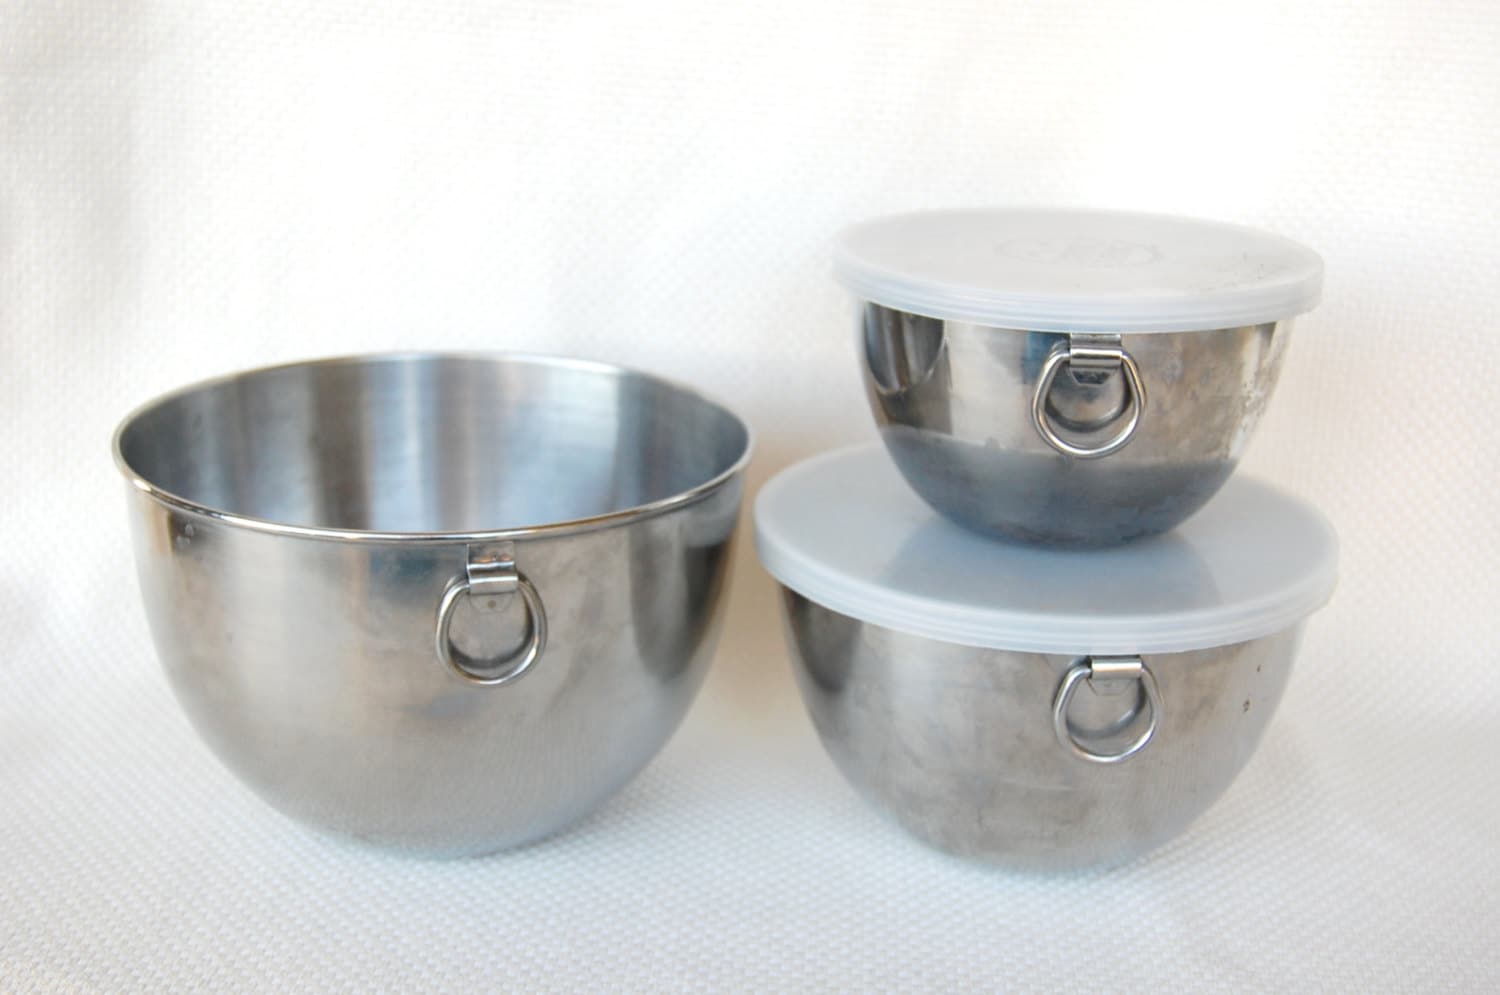 Vintage Revere Ware Stainless Steel Mixing Bowls with Handles Revere Ware Stainless Steel Bowls